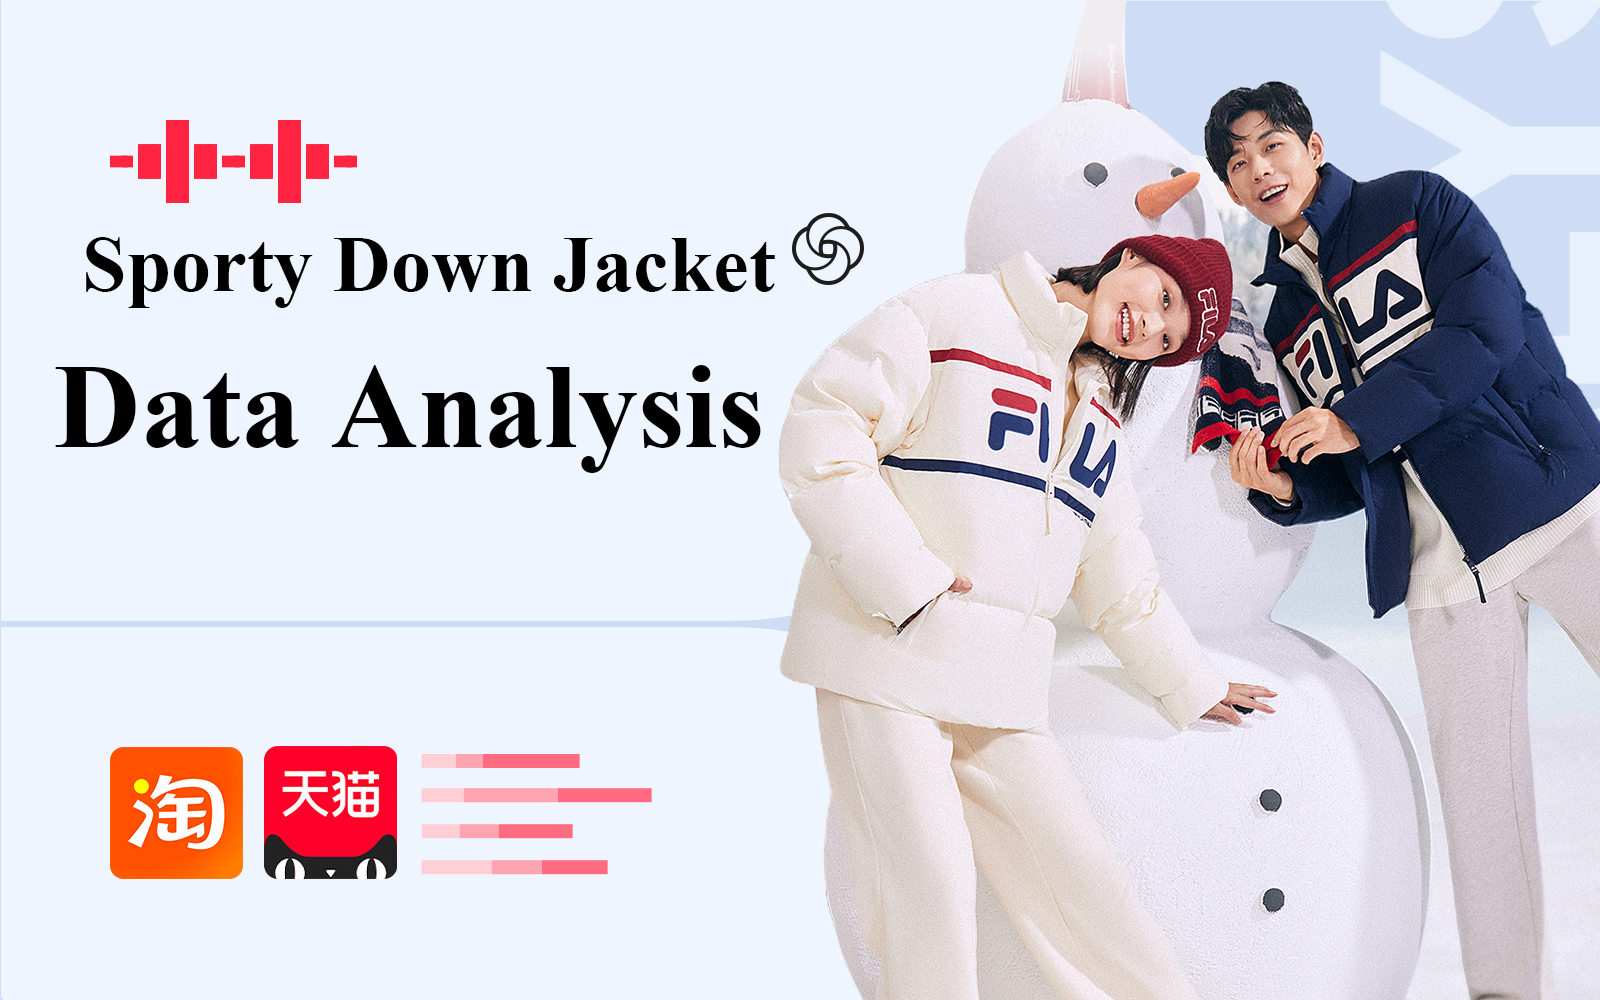 Sporty Down Jacket -- The Data Analysis of E-Commerce